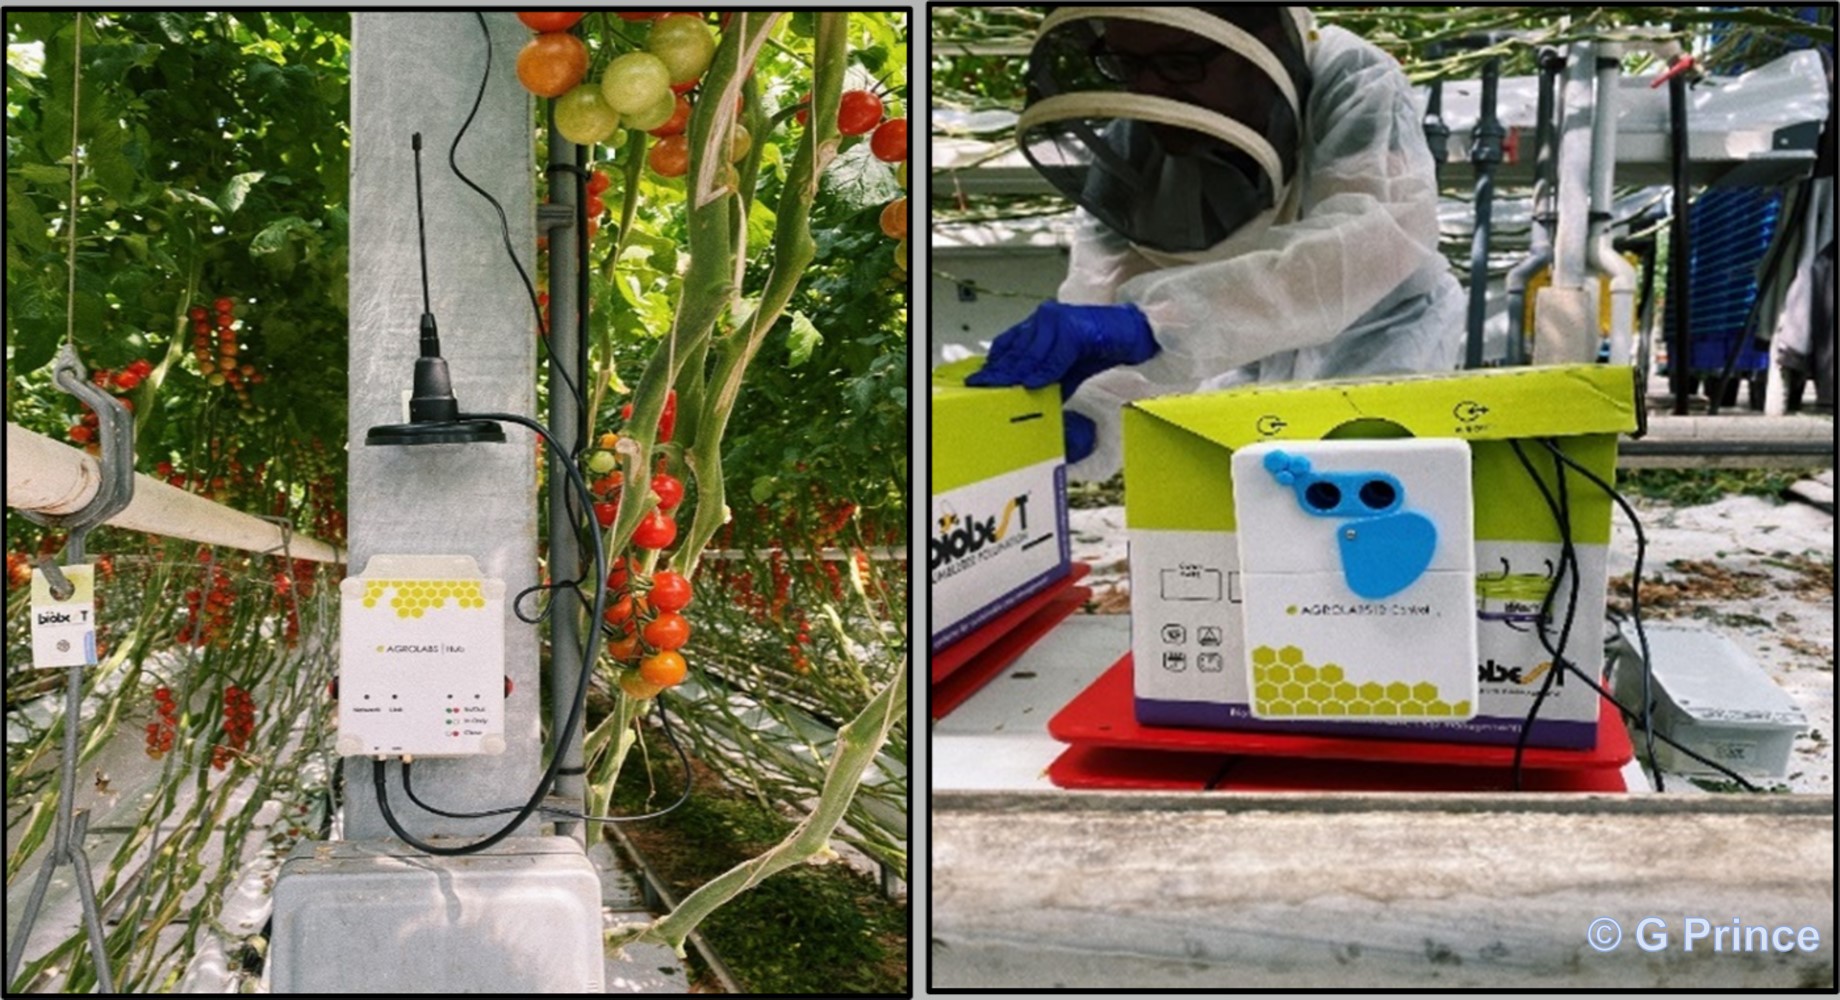 Agrolabs data relay located in glasshouse and Agrolab monitor attached to a hive